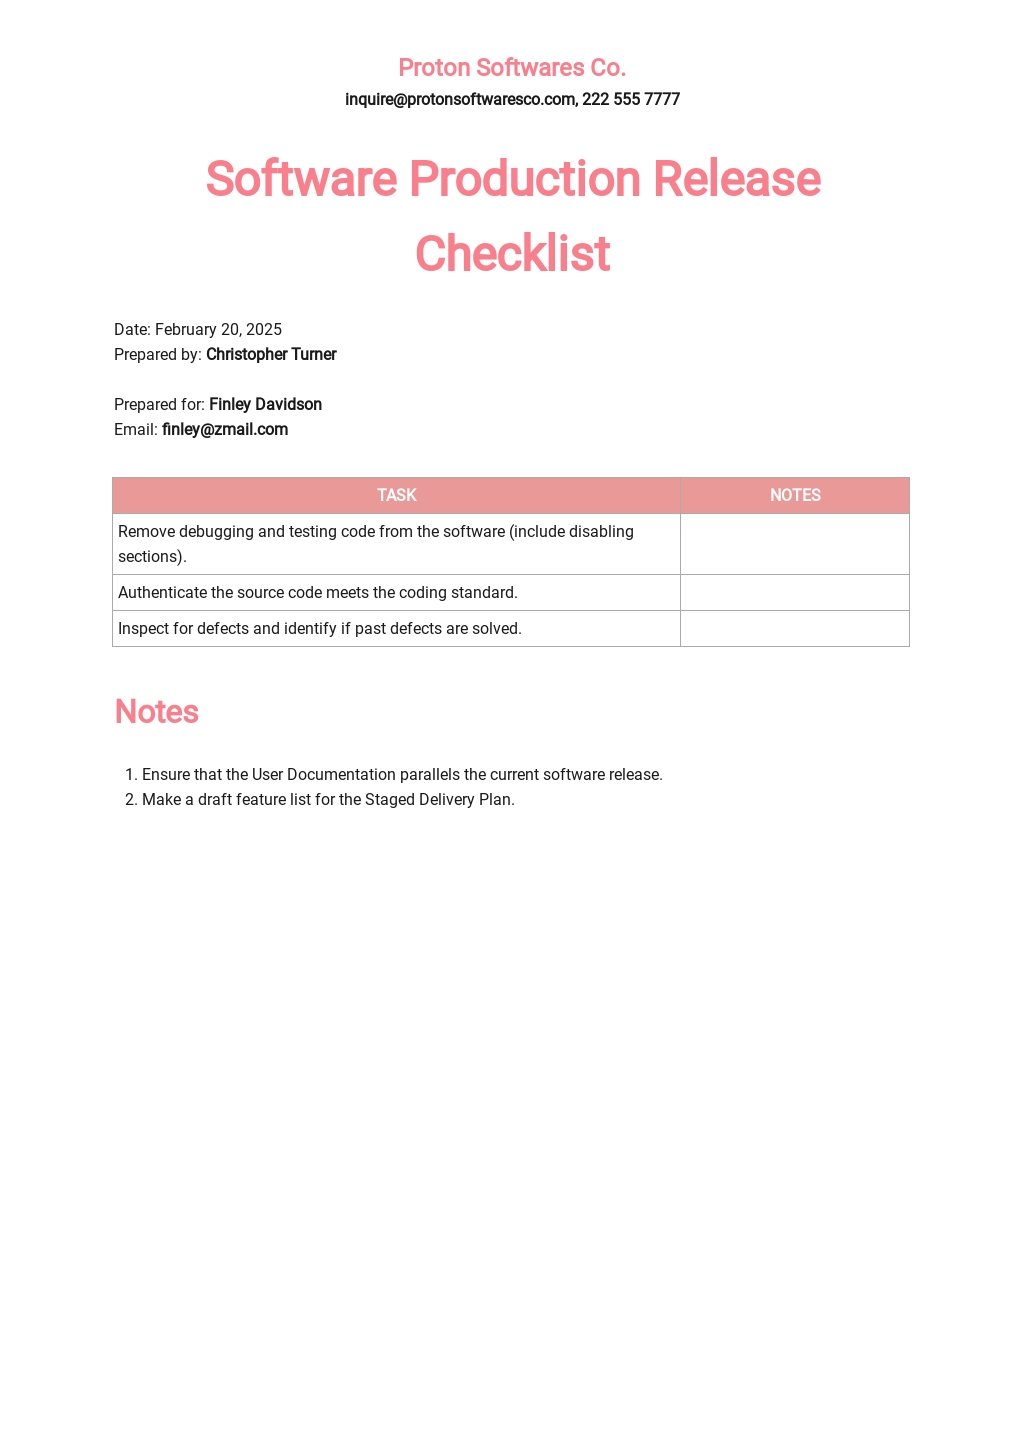 Software Production Release Checklist Template.jpe